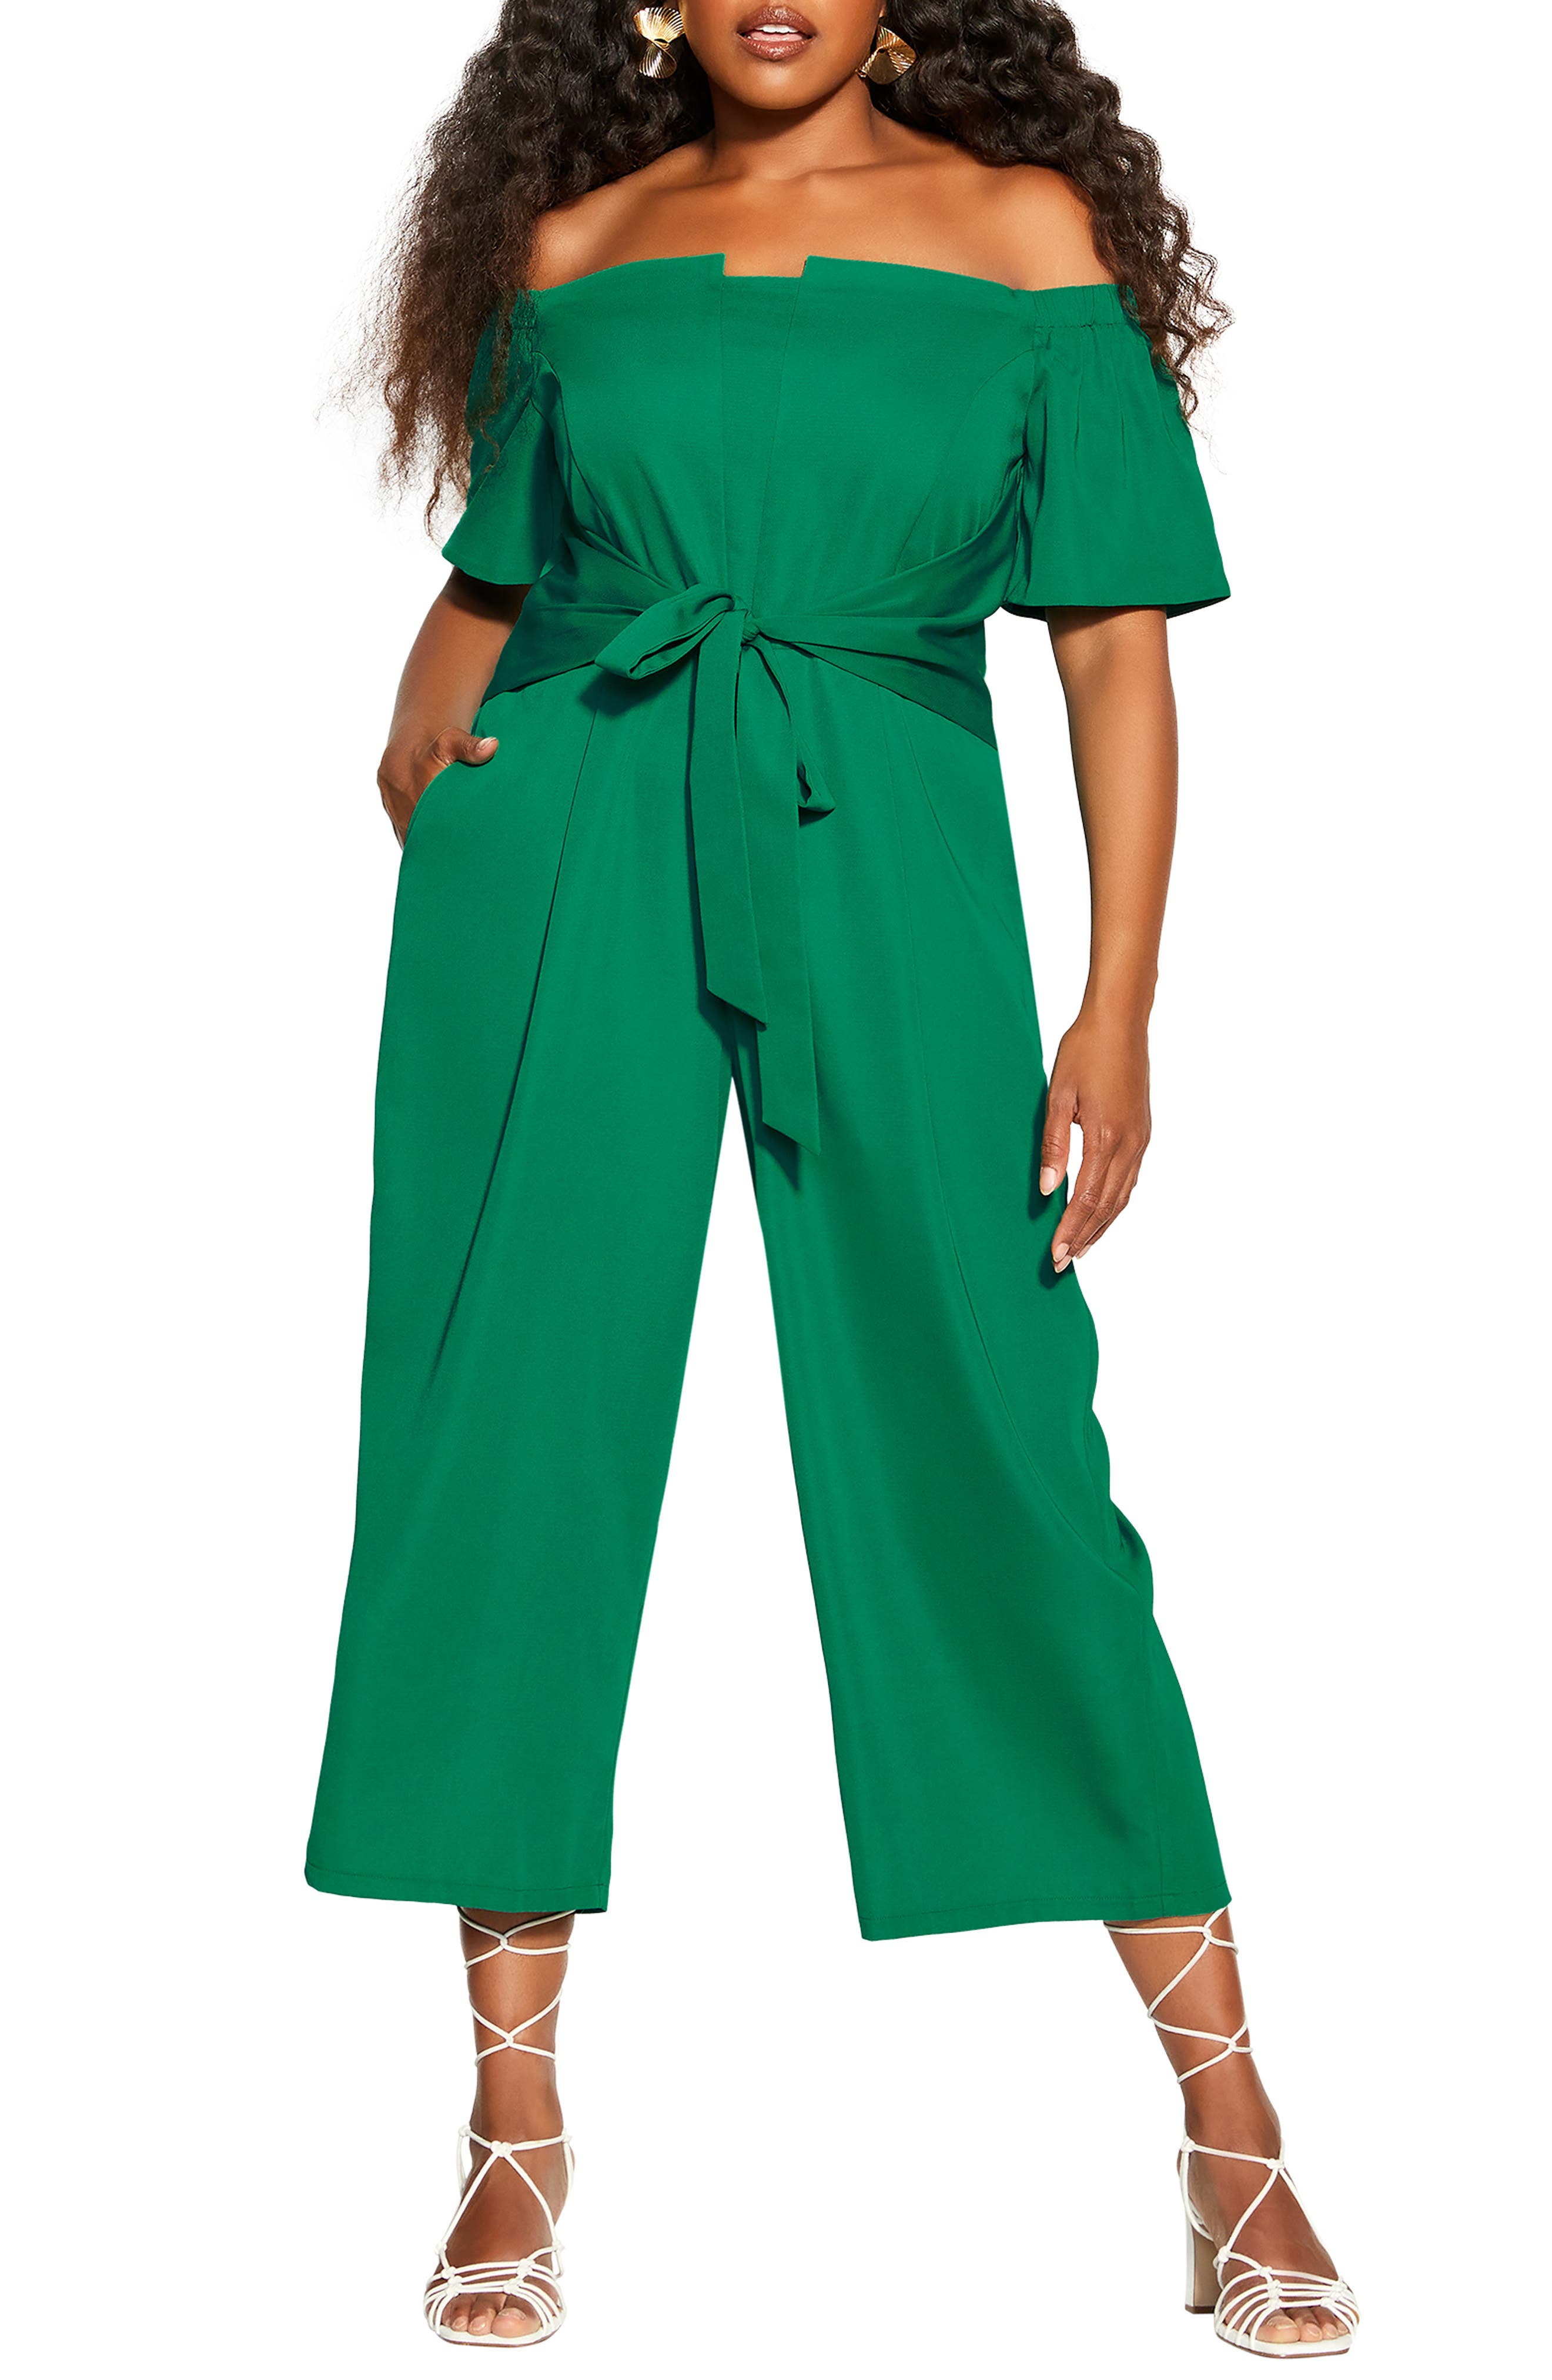 Boohoo Plus Bardot Floral Print Belted Jumpsuit in Green Womens Clothing Jumpsuits and rompers Full-length jumpsuits and rompers 